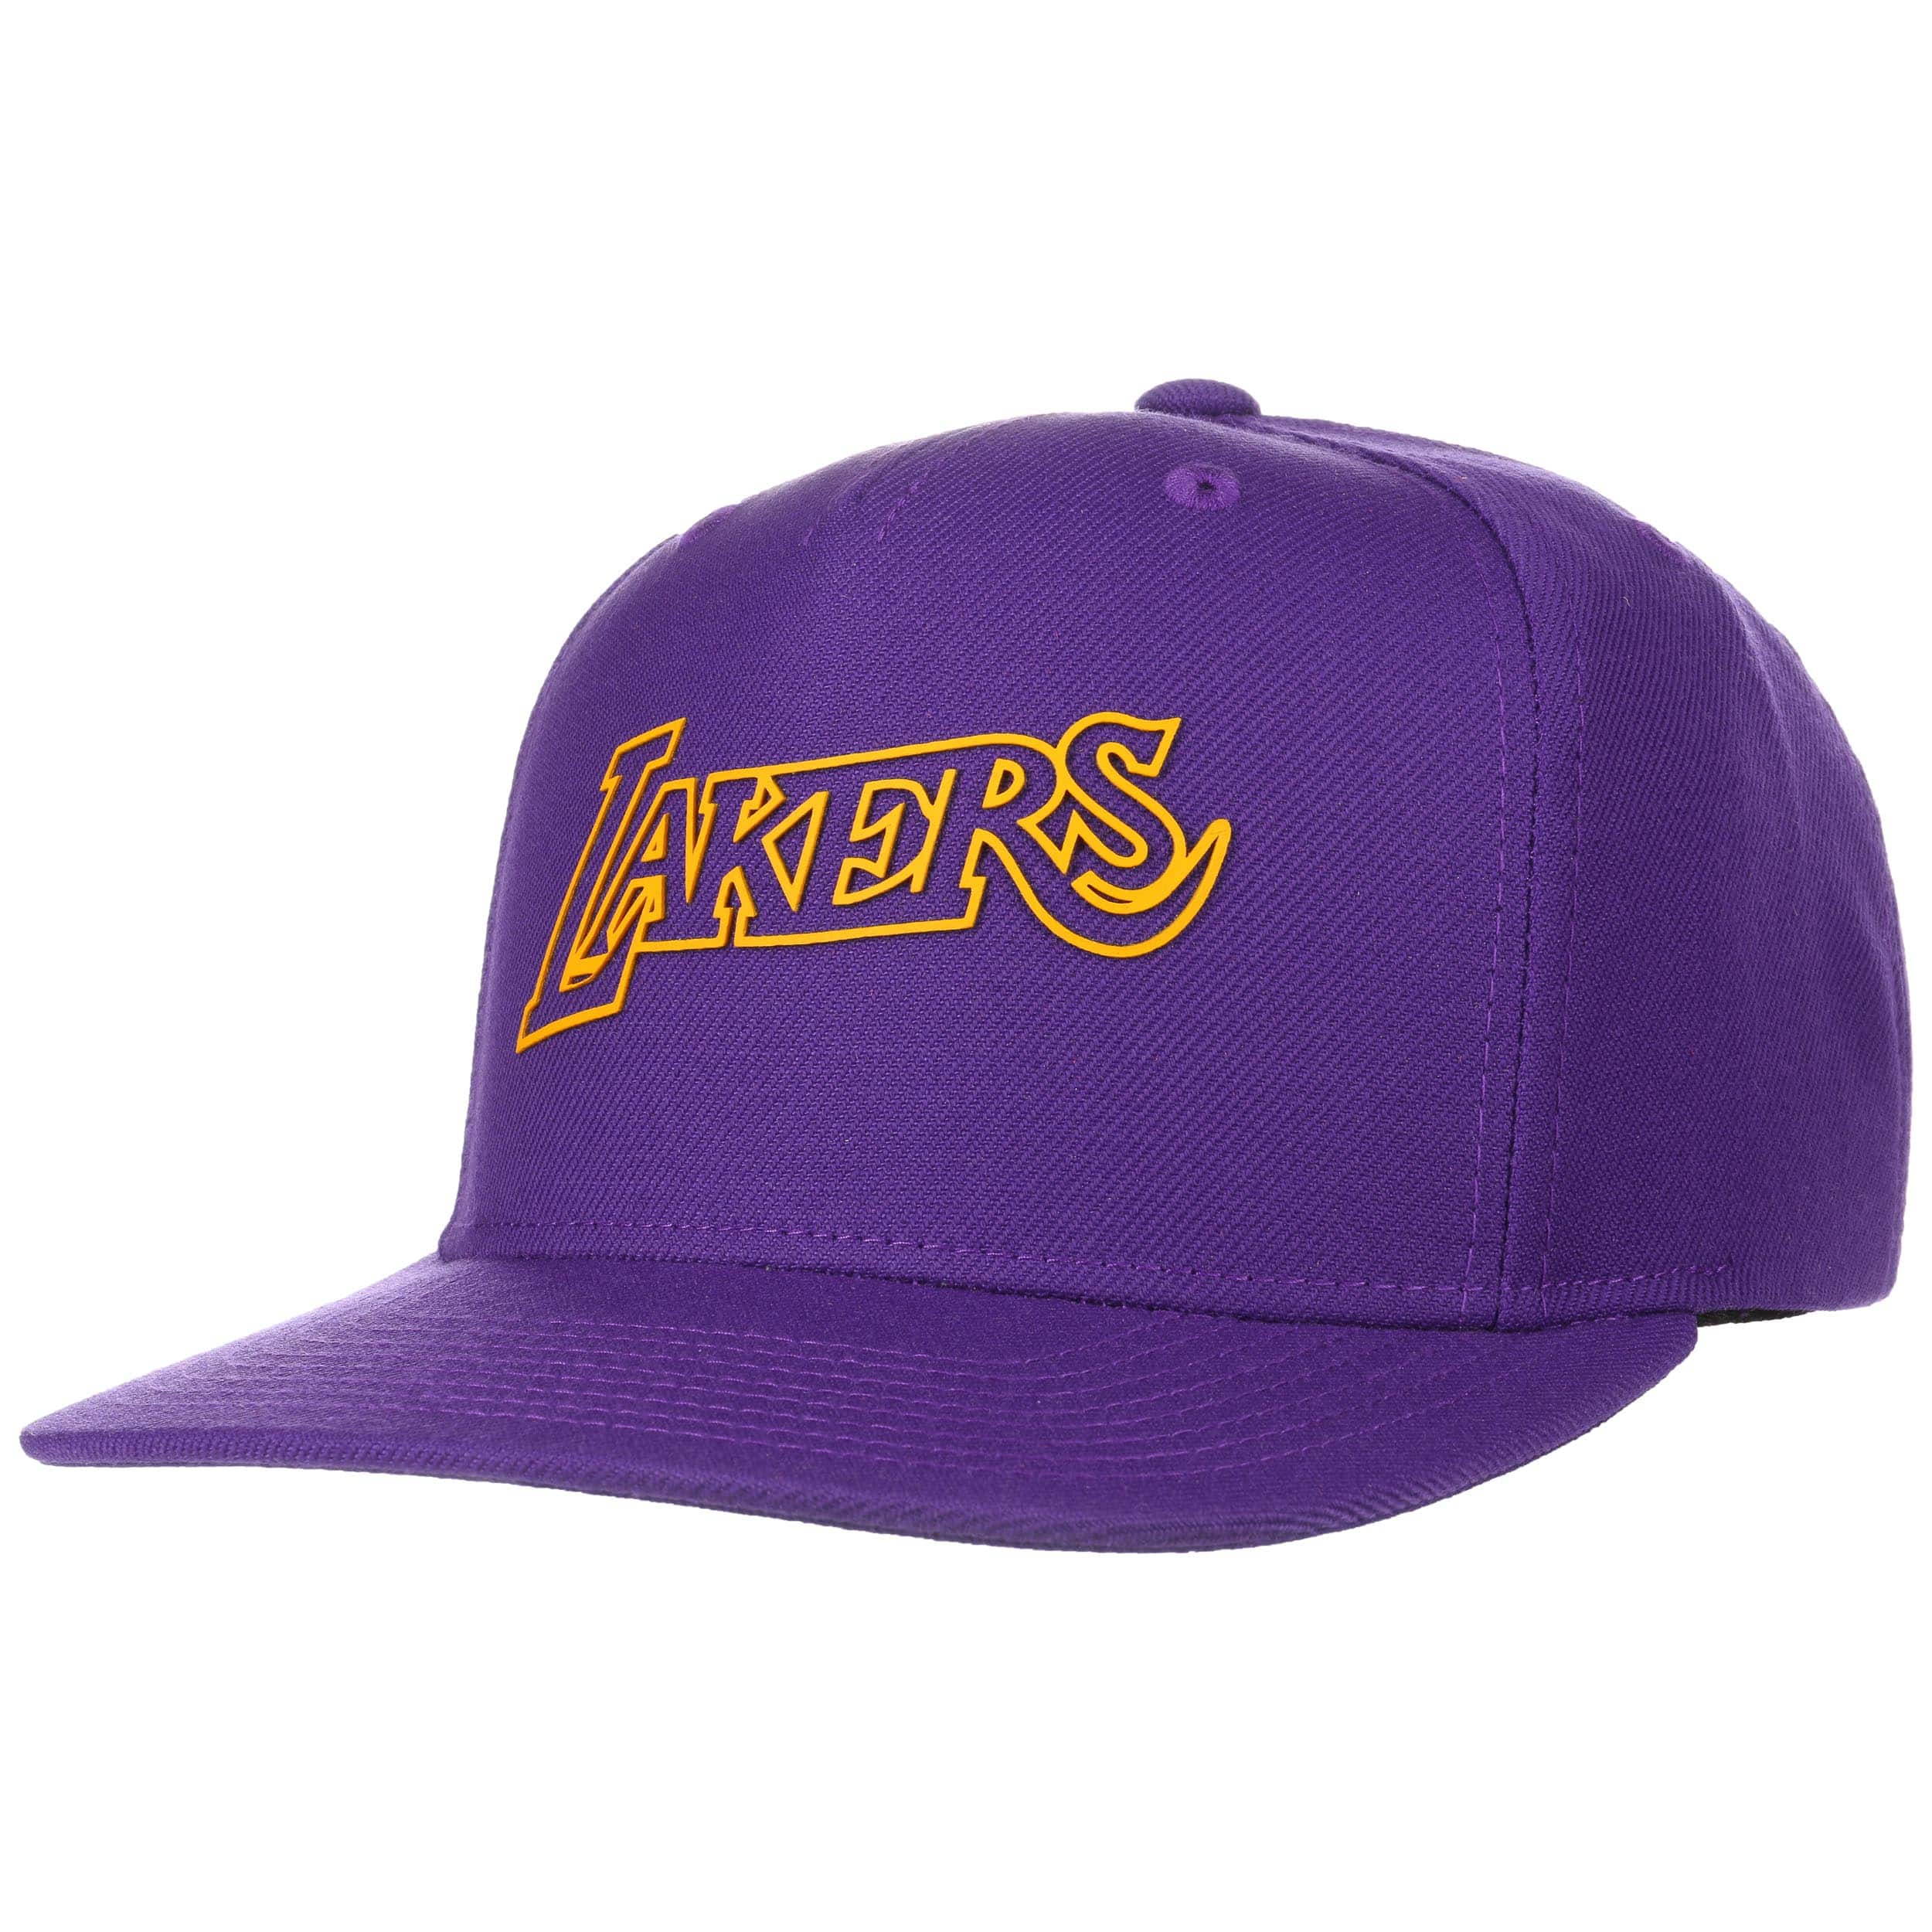 Raised Perimeter Lakers Cap by Mitchell & Ness - 24,95